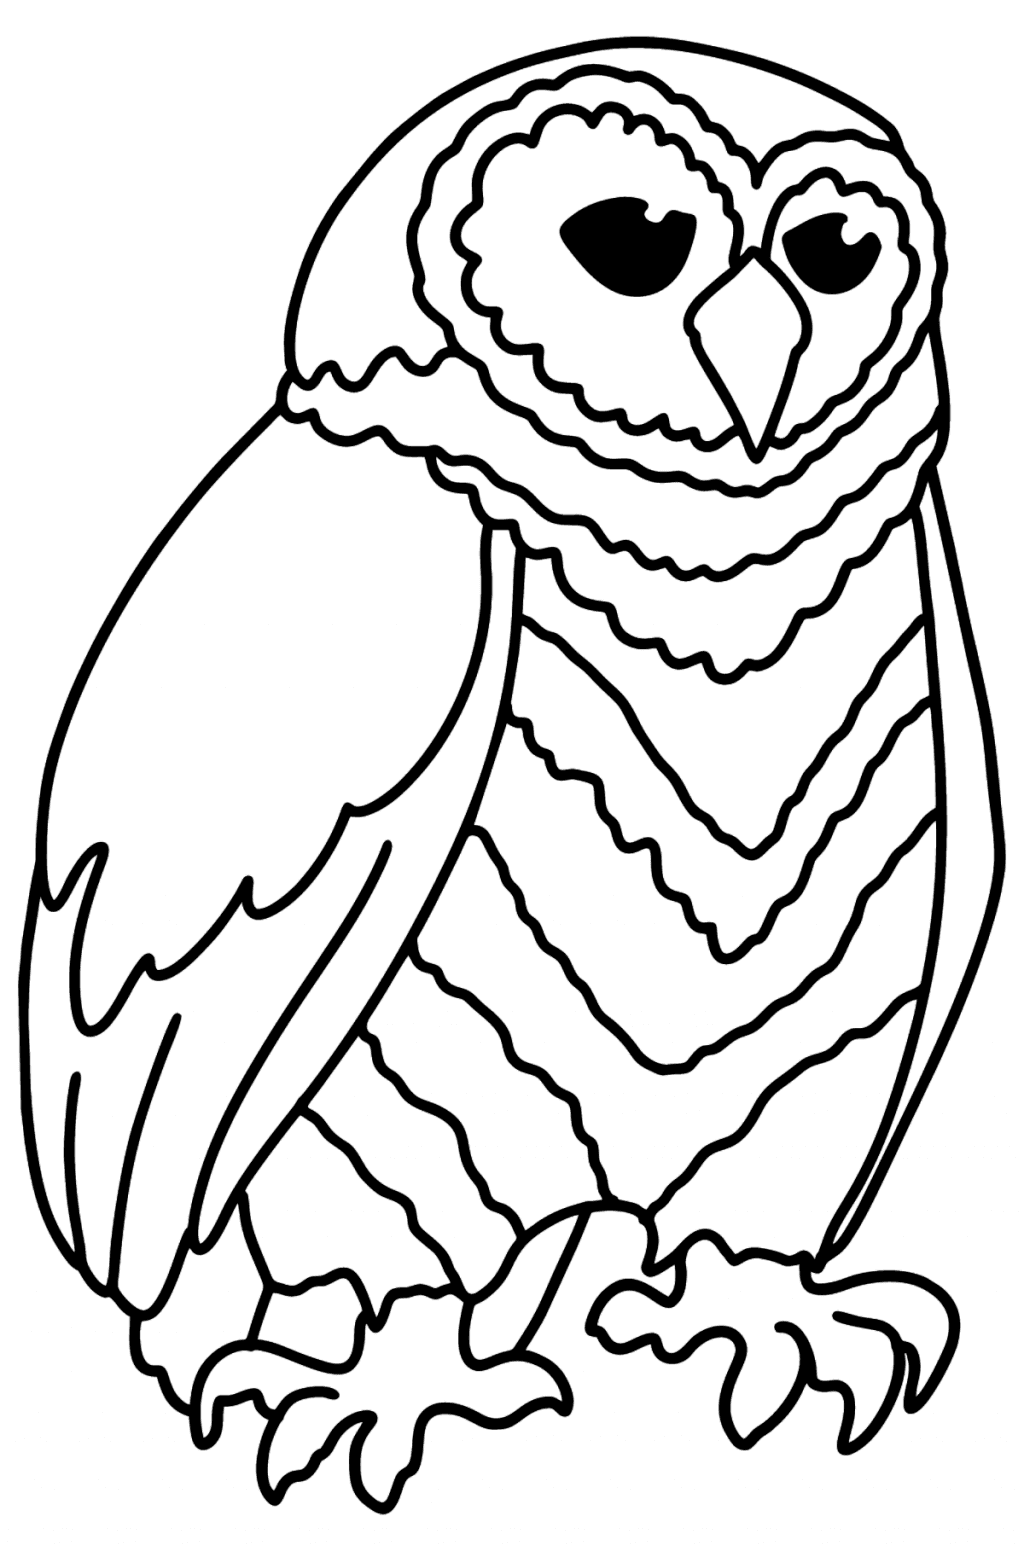 Nature Coloring Pages For Kids - Free Printable, and Online!